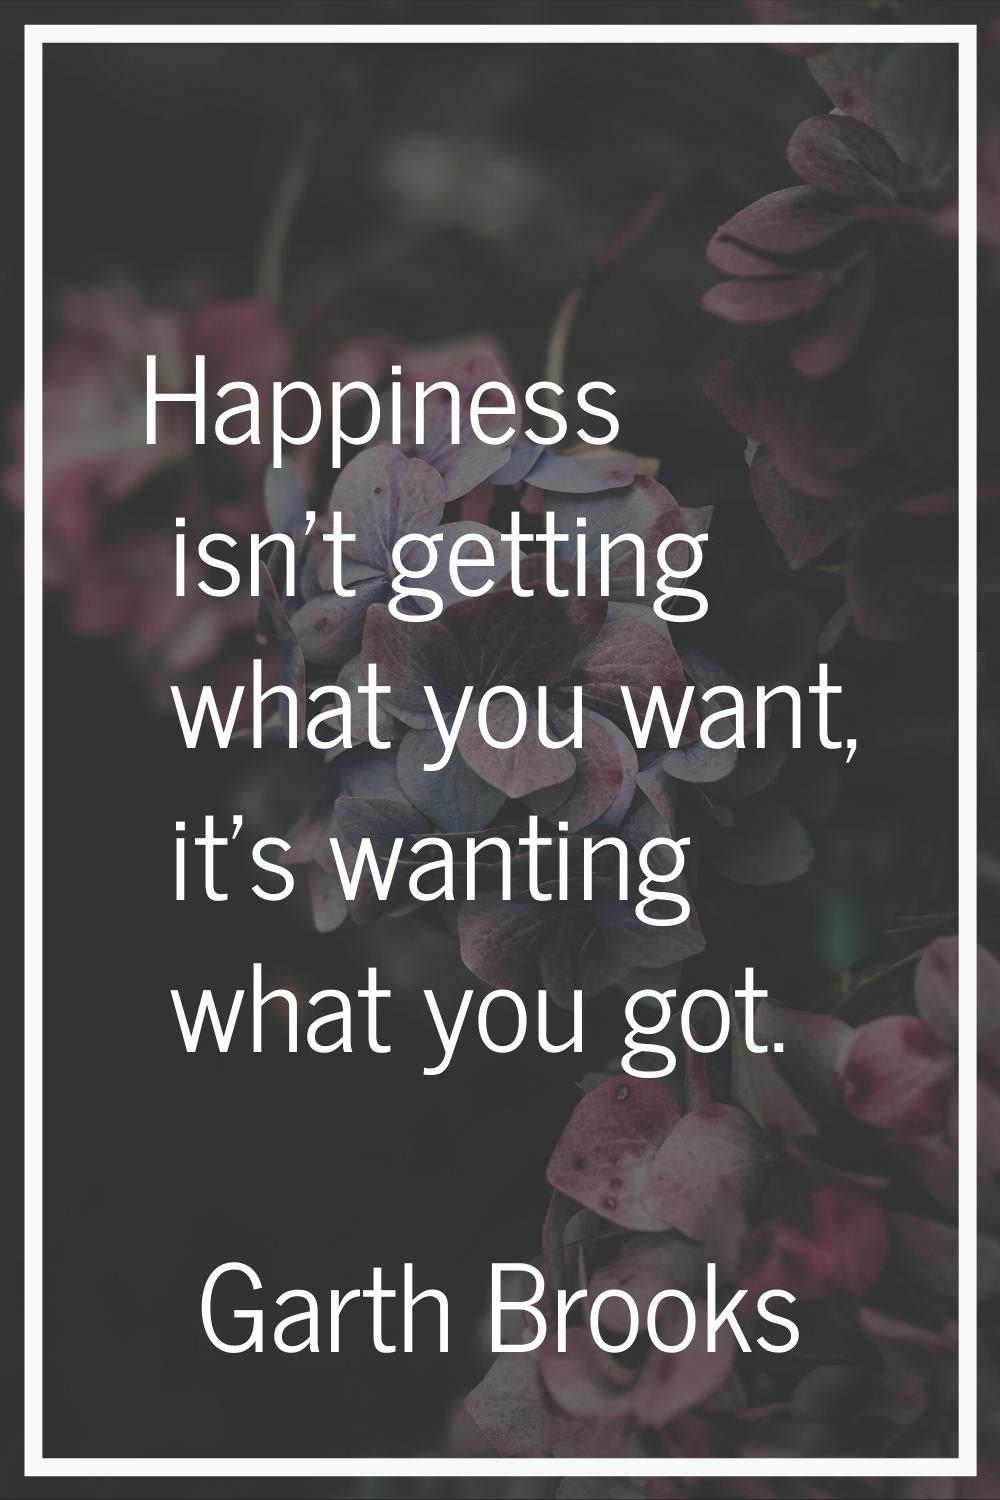 Happiness isn't getting what you want, it's wanting what you got.